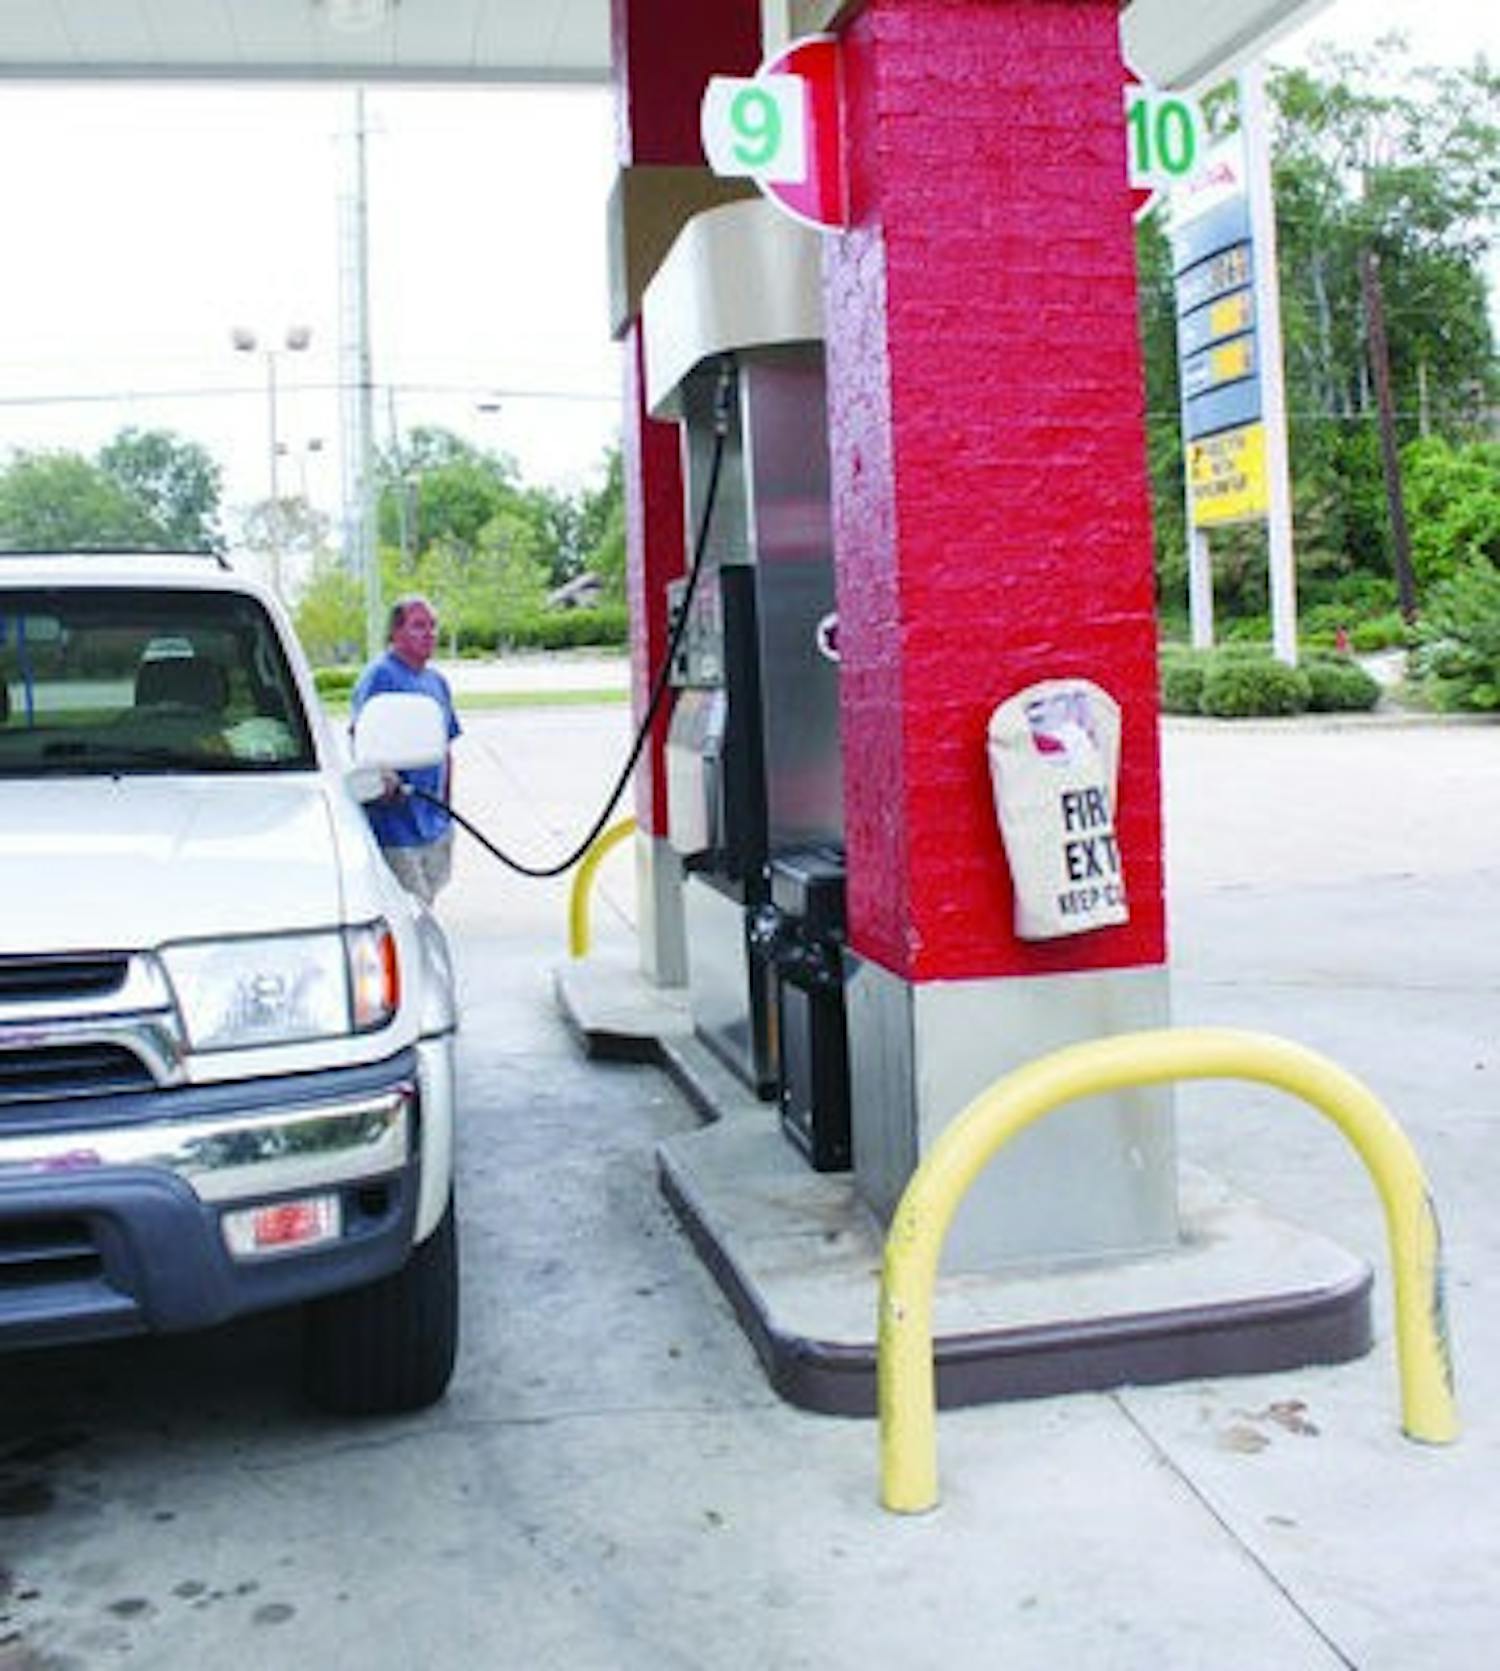 Jerry Long fills his tank at a station on Glenn Avenue. (Alex Sager / ASSOCIATE PHOTO EDITOR)